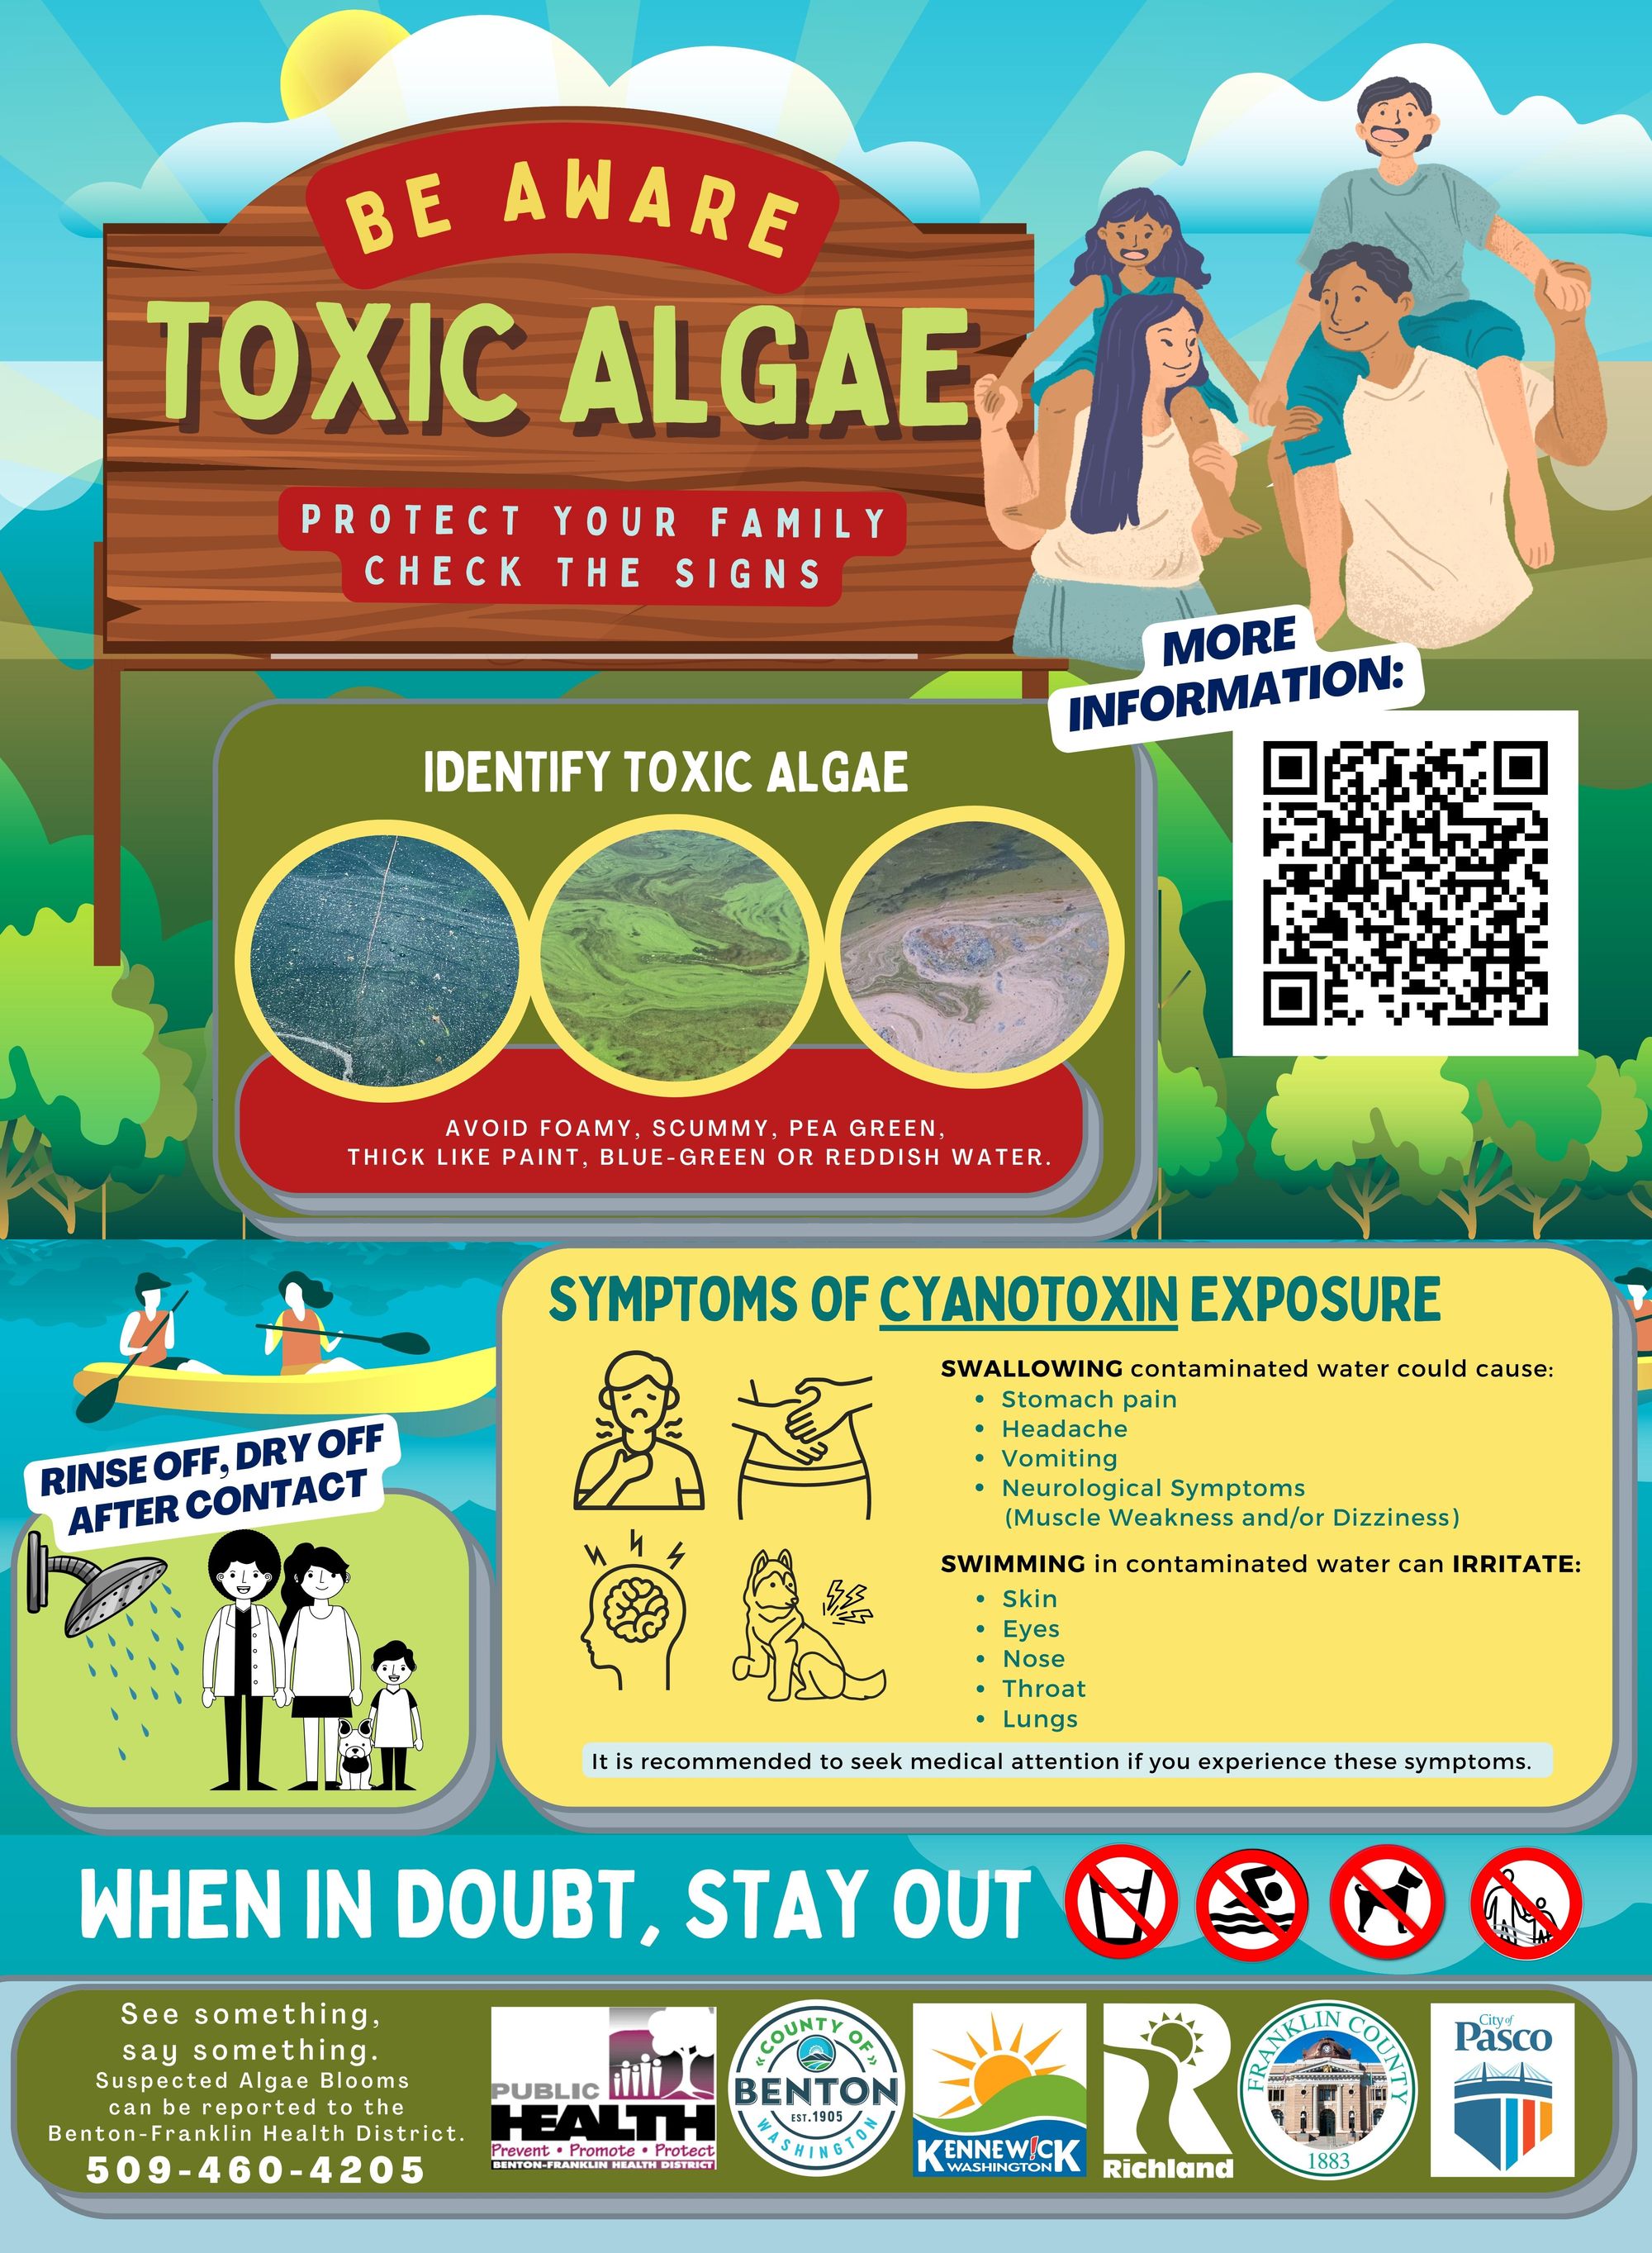 An informative poster about being aware of toxic algae and cyanotoxin exposure.